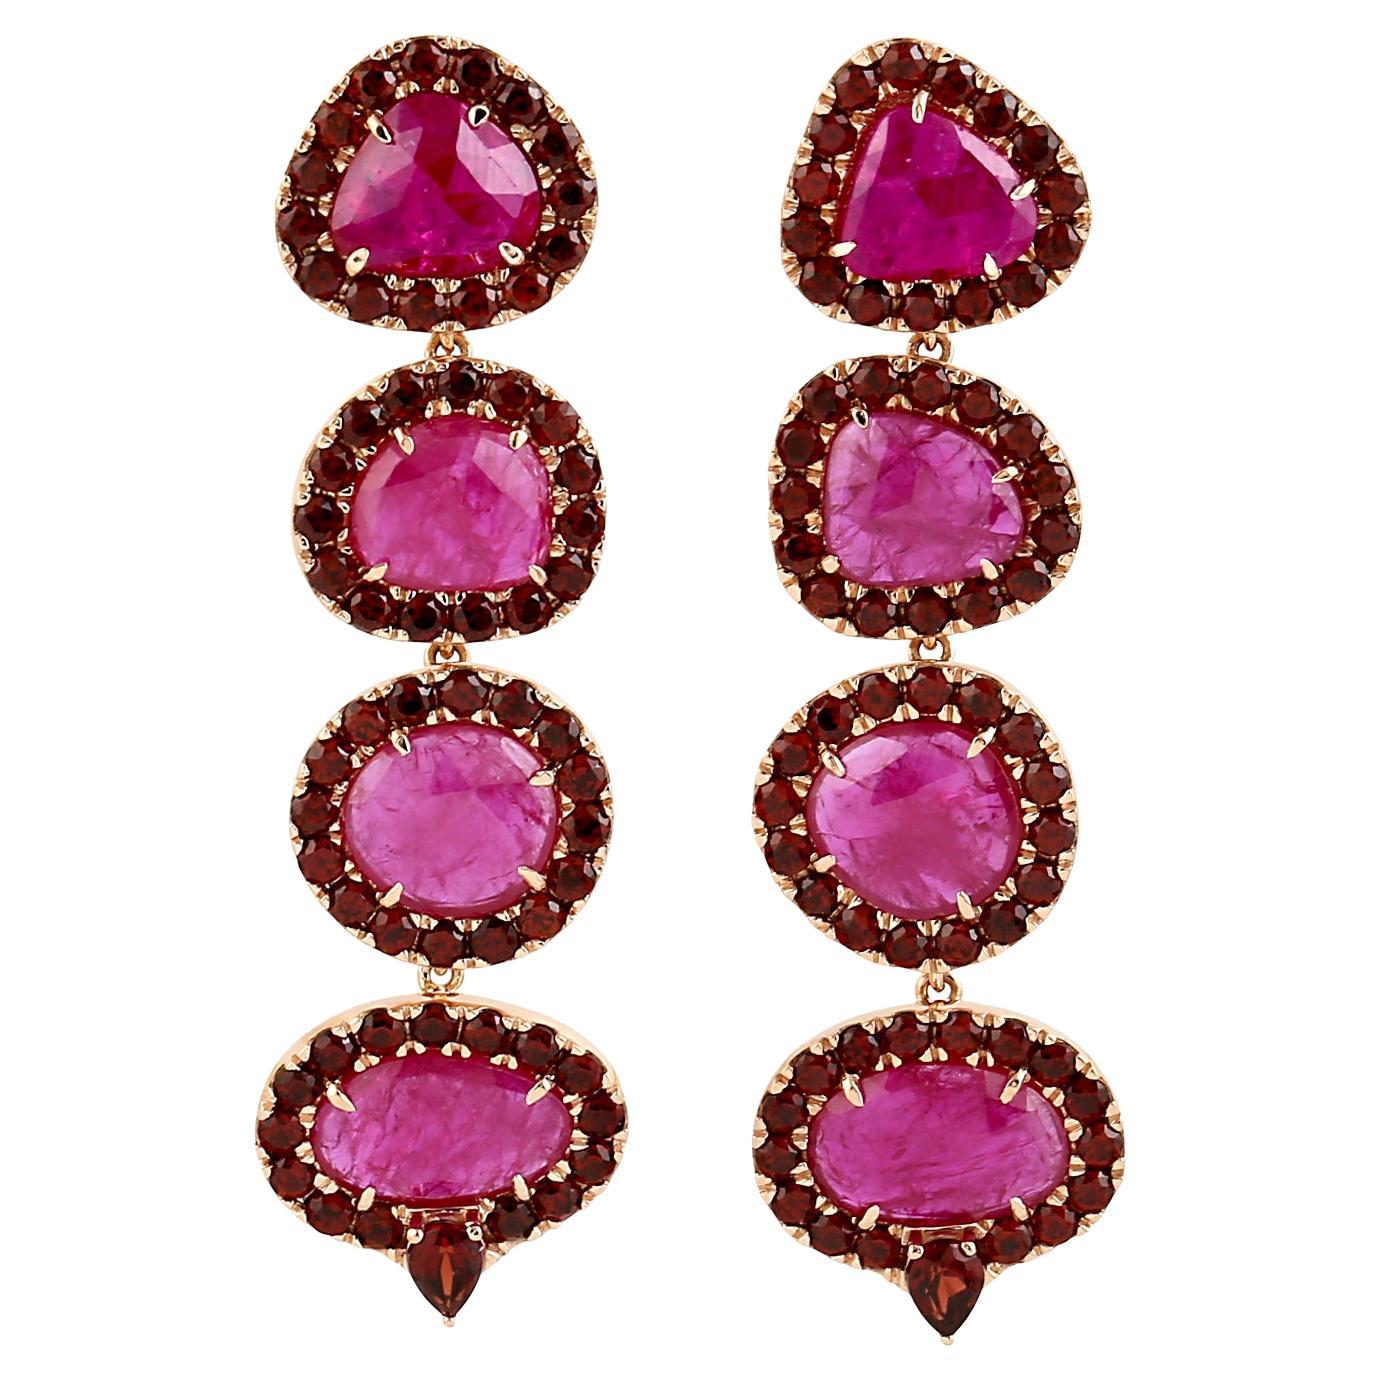 10.31 ct Ruby Dangle Earrings With Garnet Made In 18k Yellow Gold For Sale